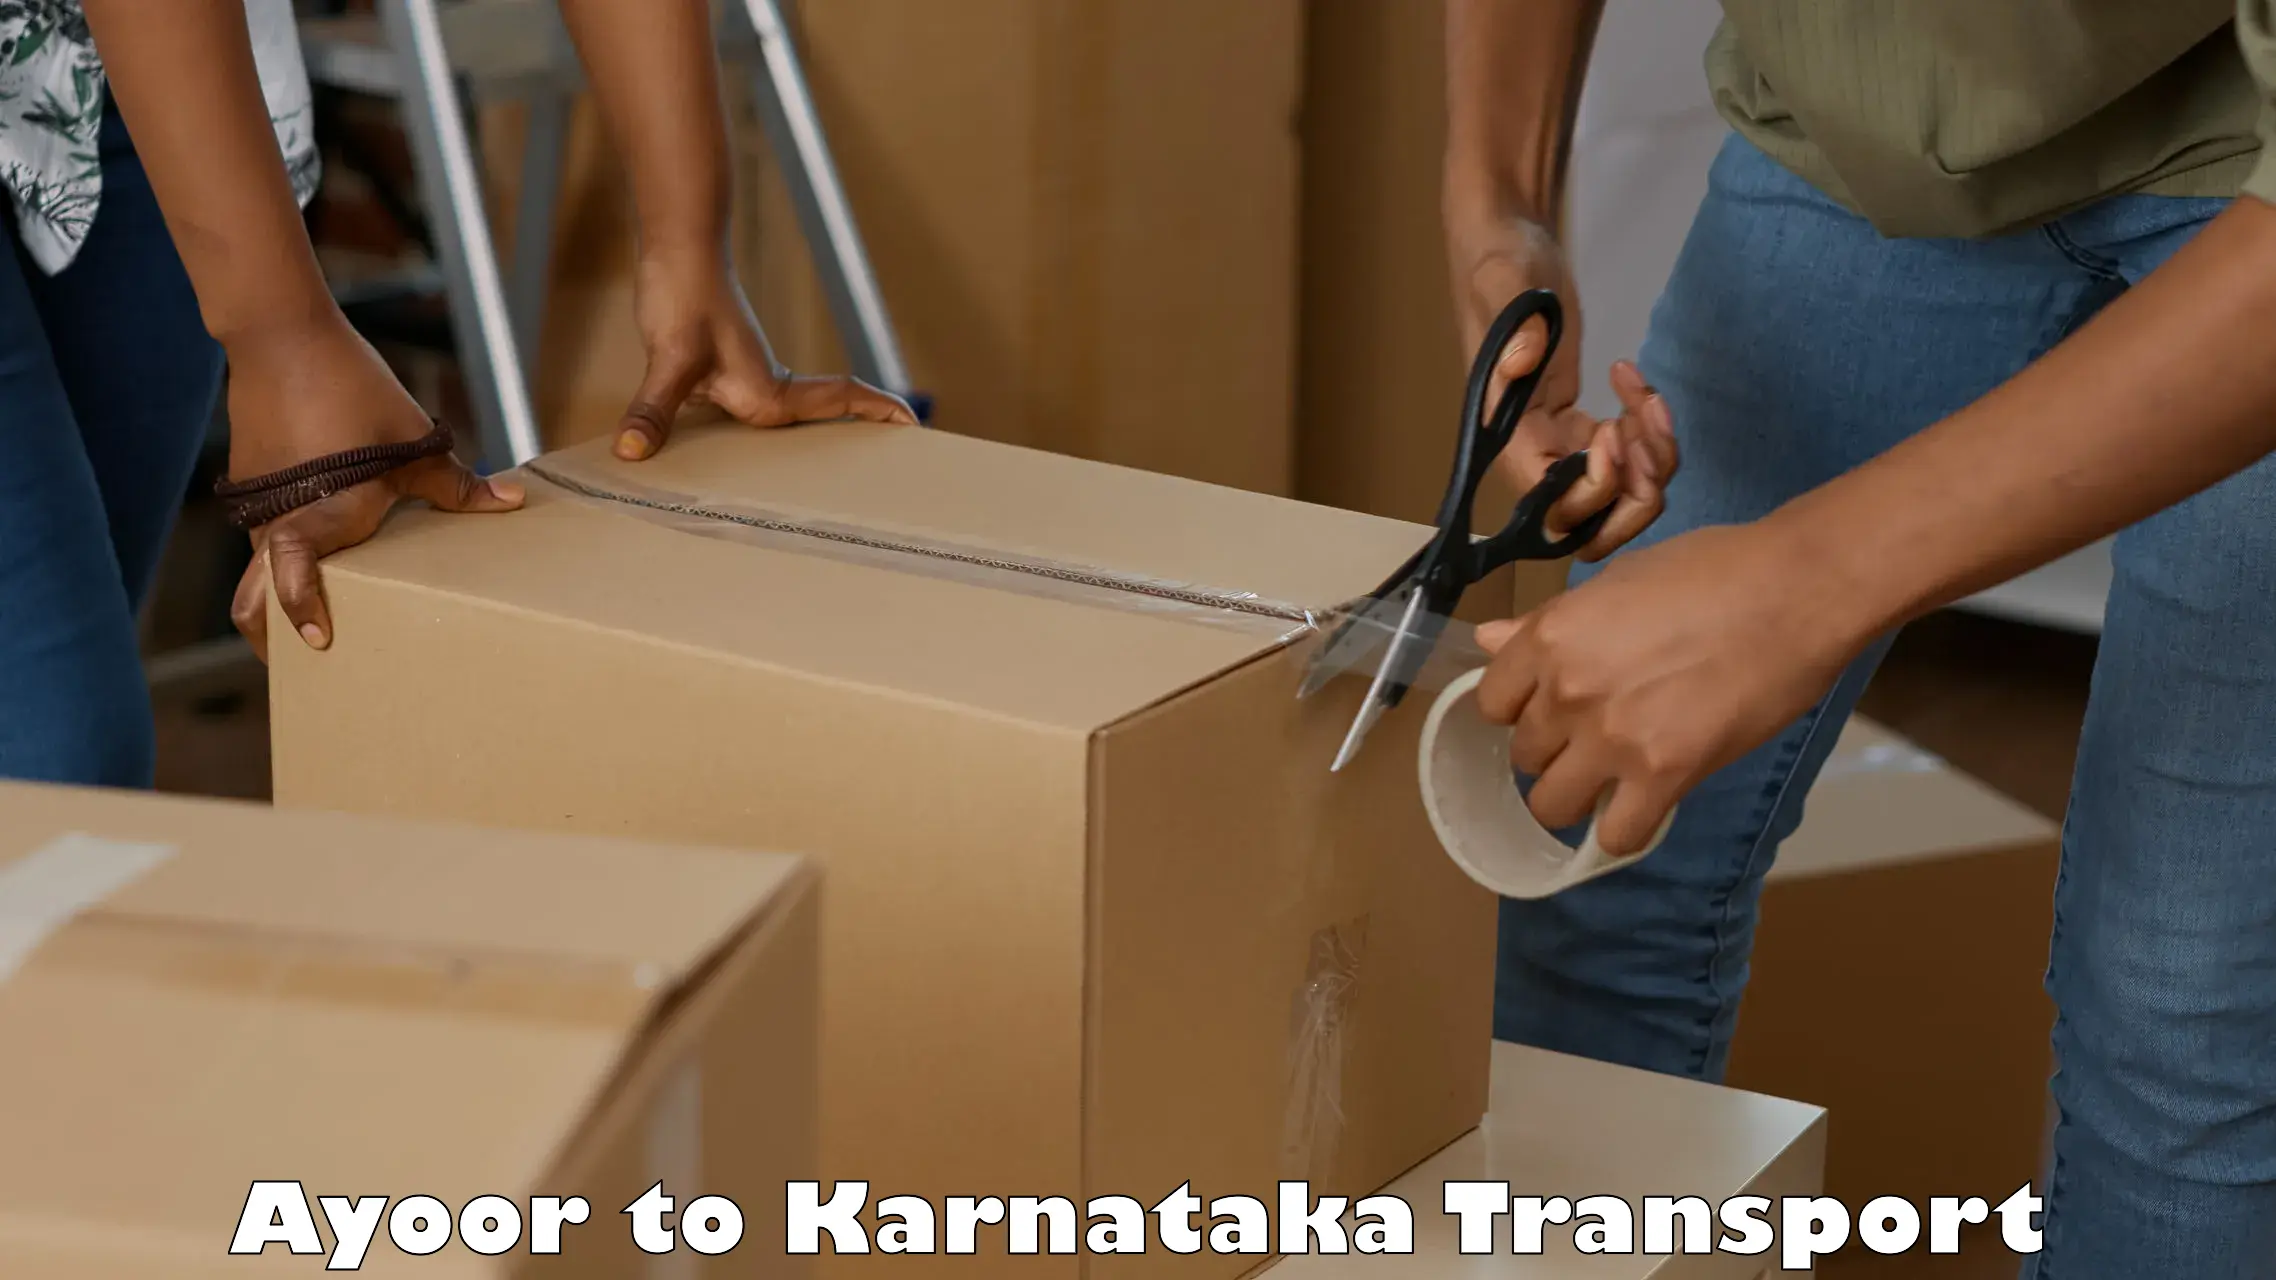 Container transport service in Ayoor to Maramanahalli